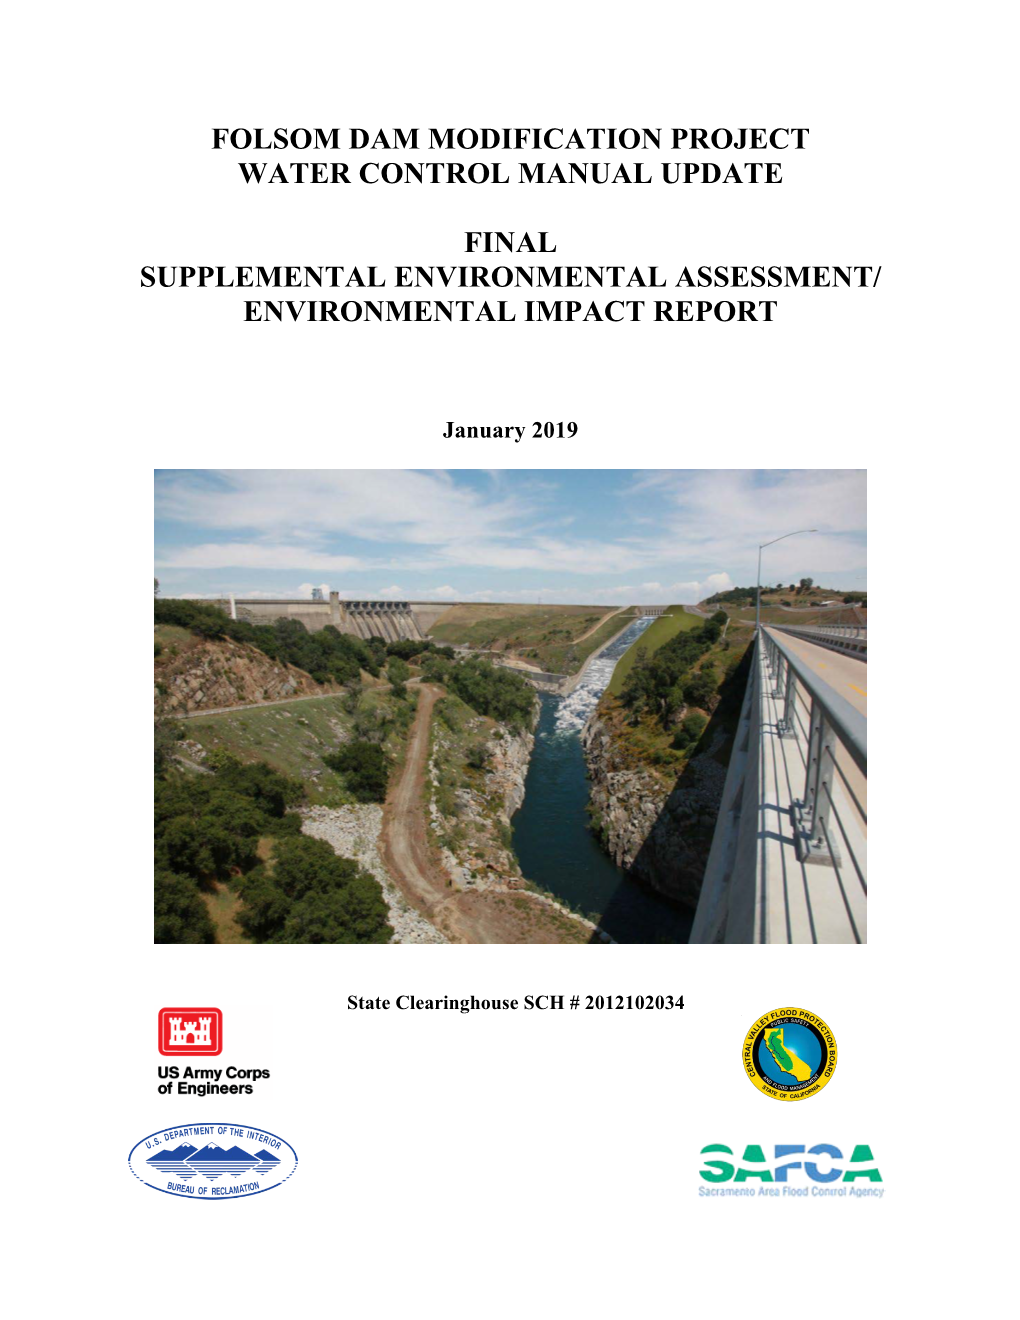 Folsom Dam Modification Project Water Control Manual Update